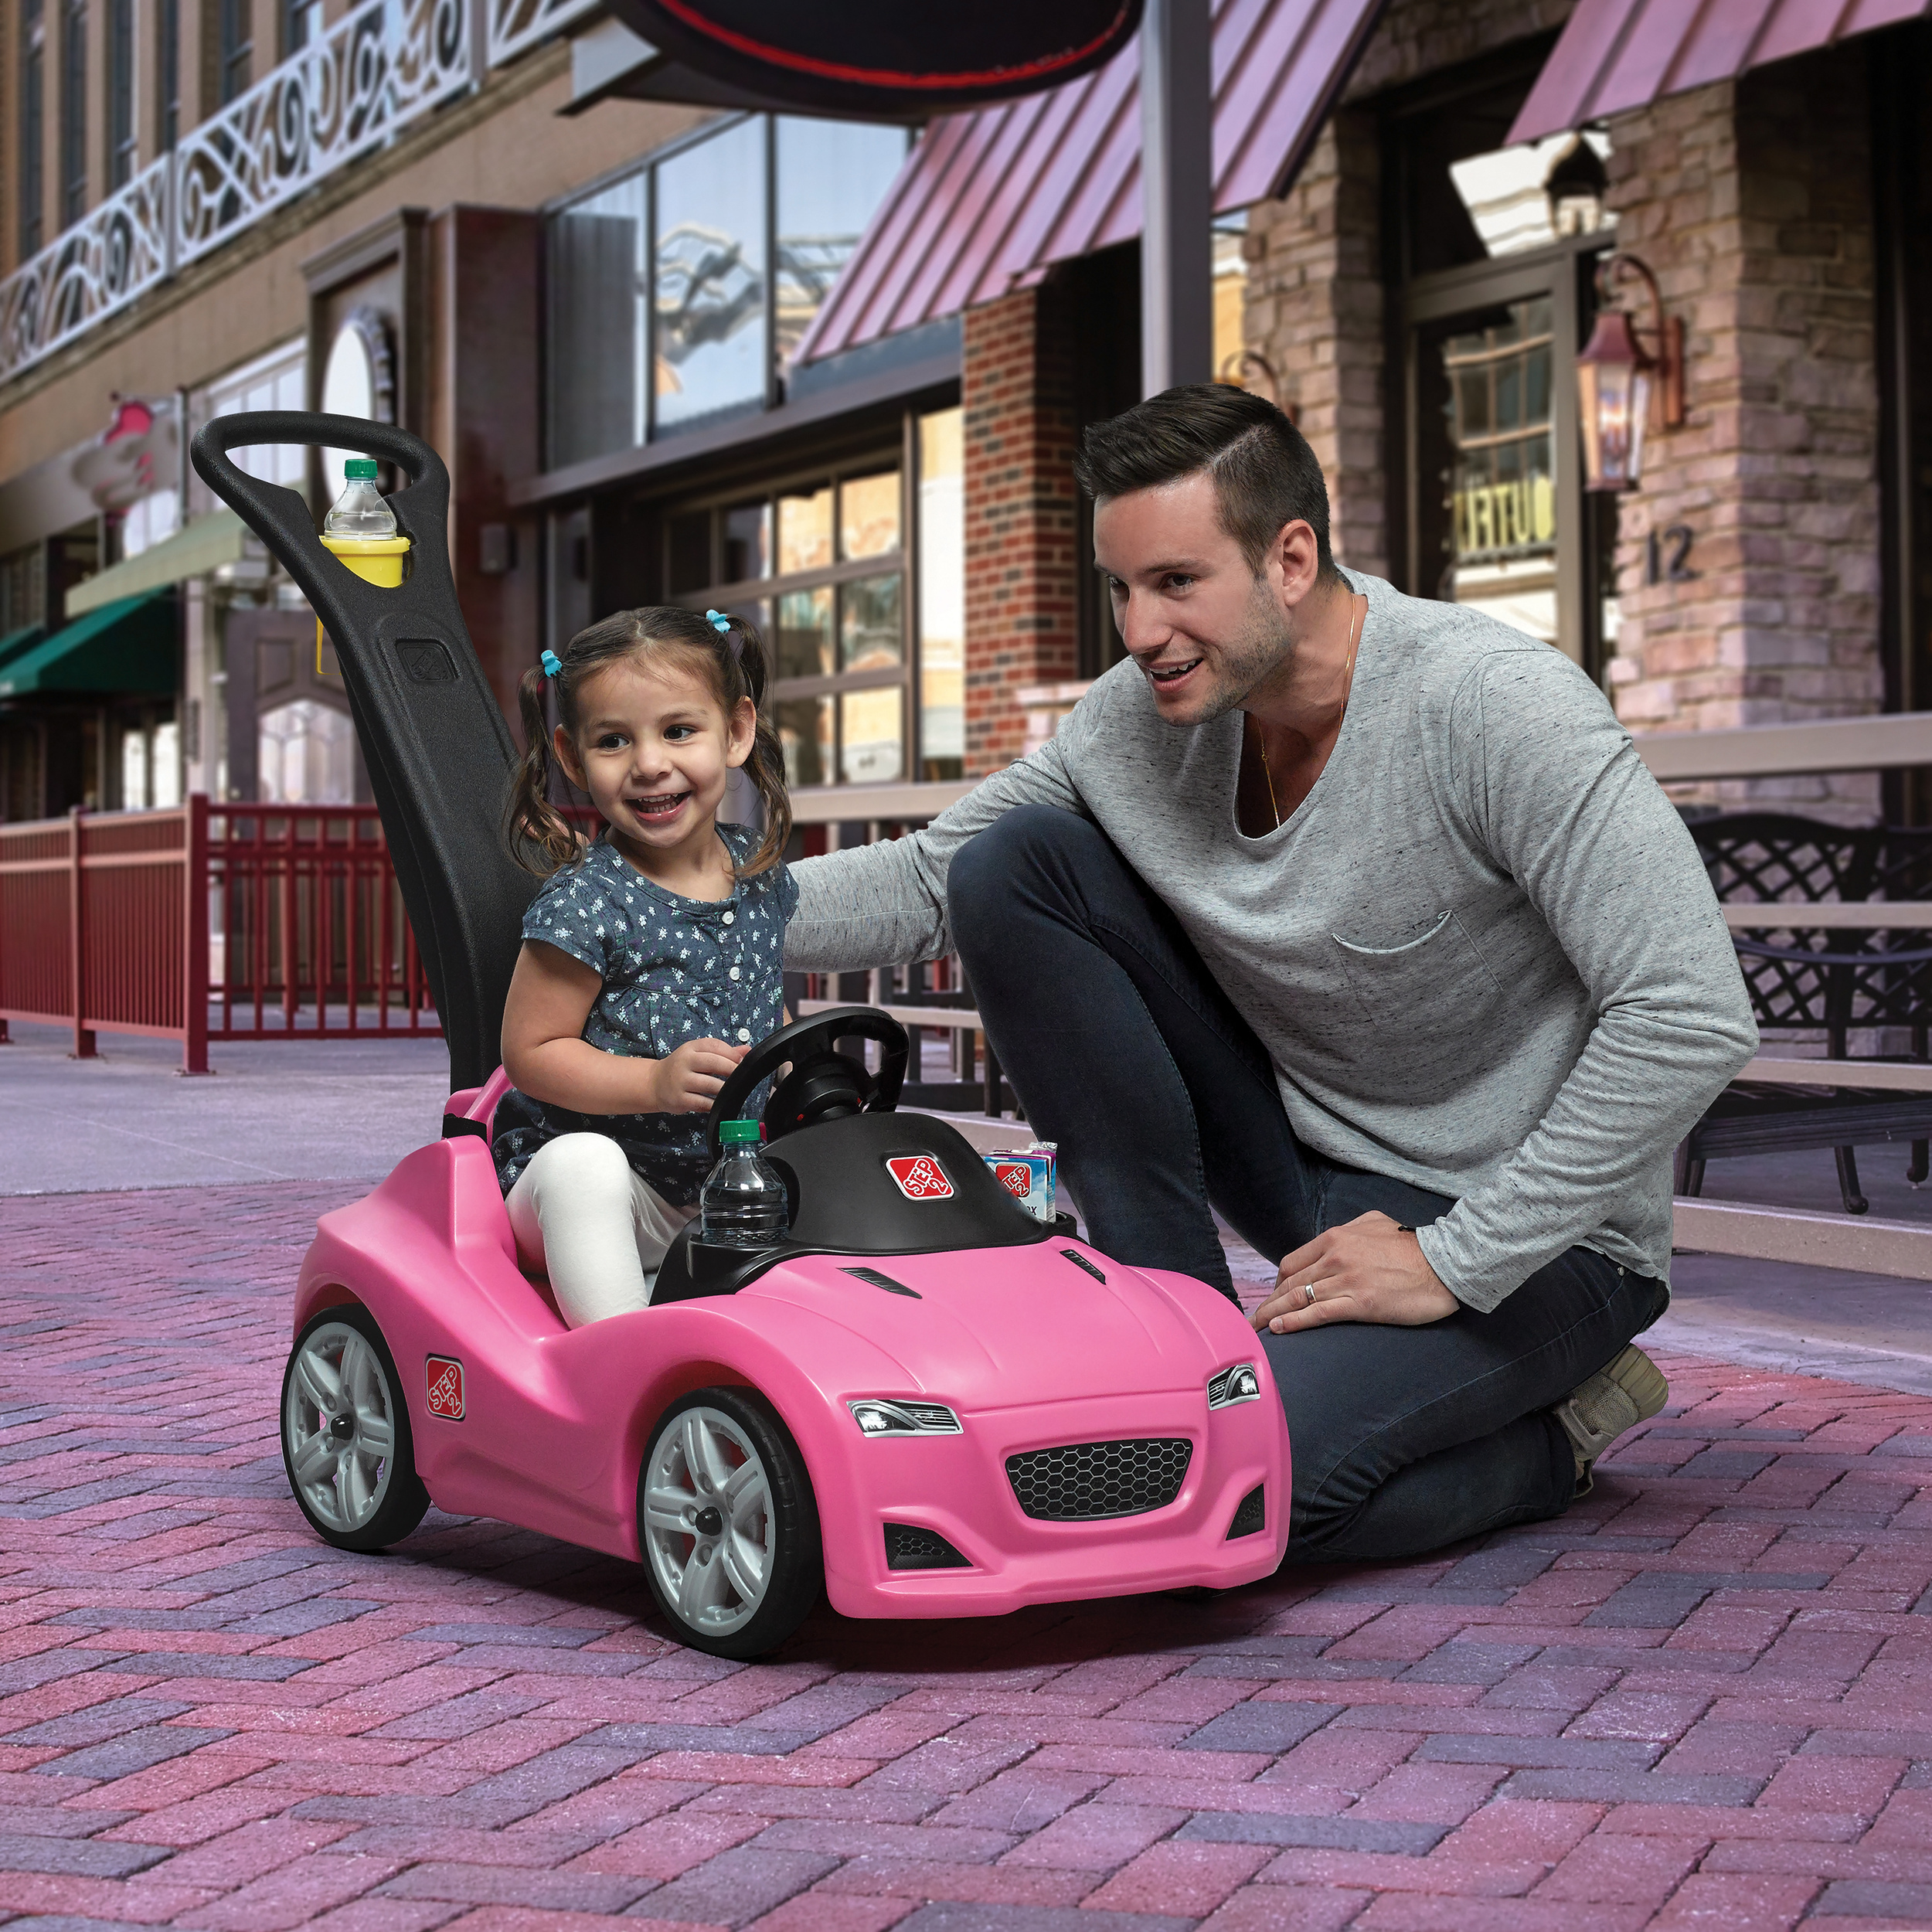 Step2 Whisper Ride Cruiser Pink Toddler Push Car and Ride on for Toddlers - image 5 of 11